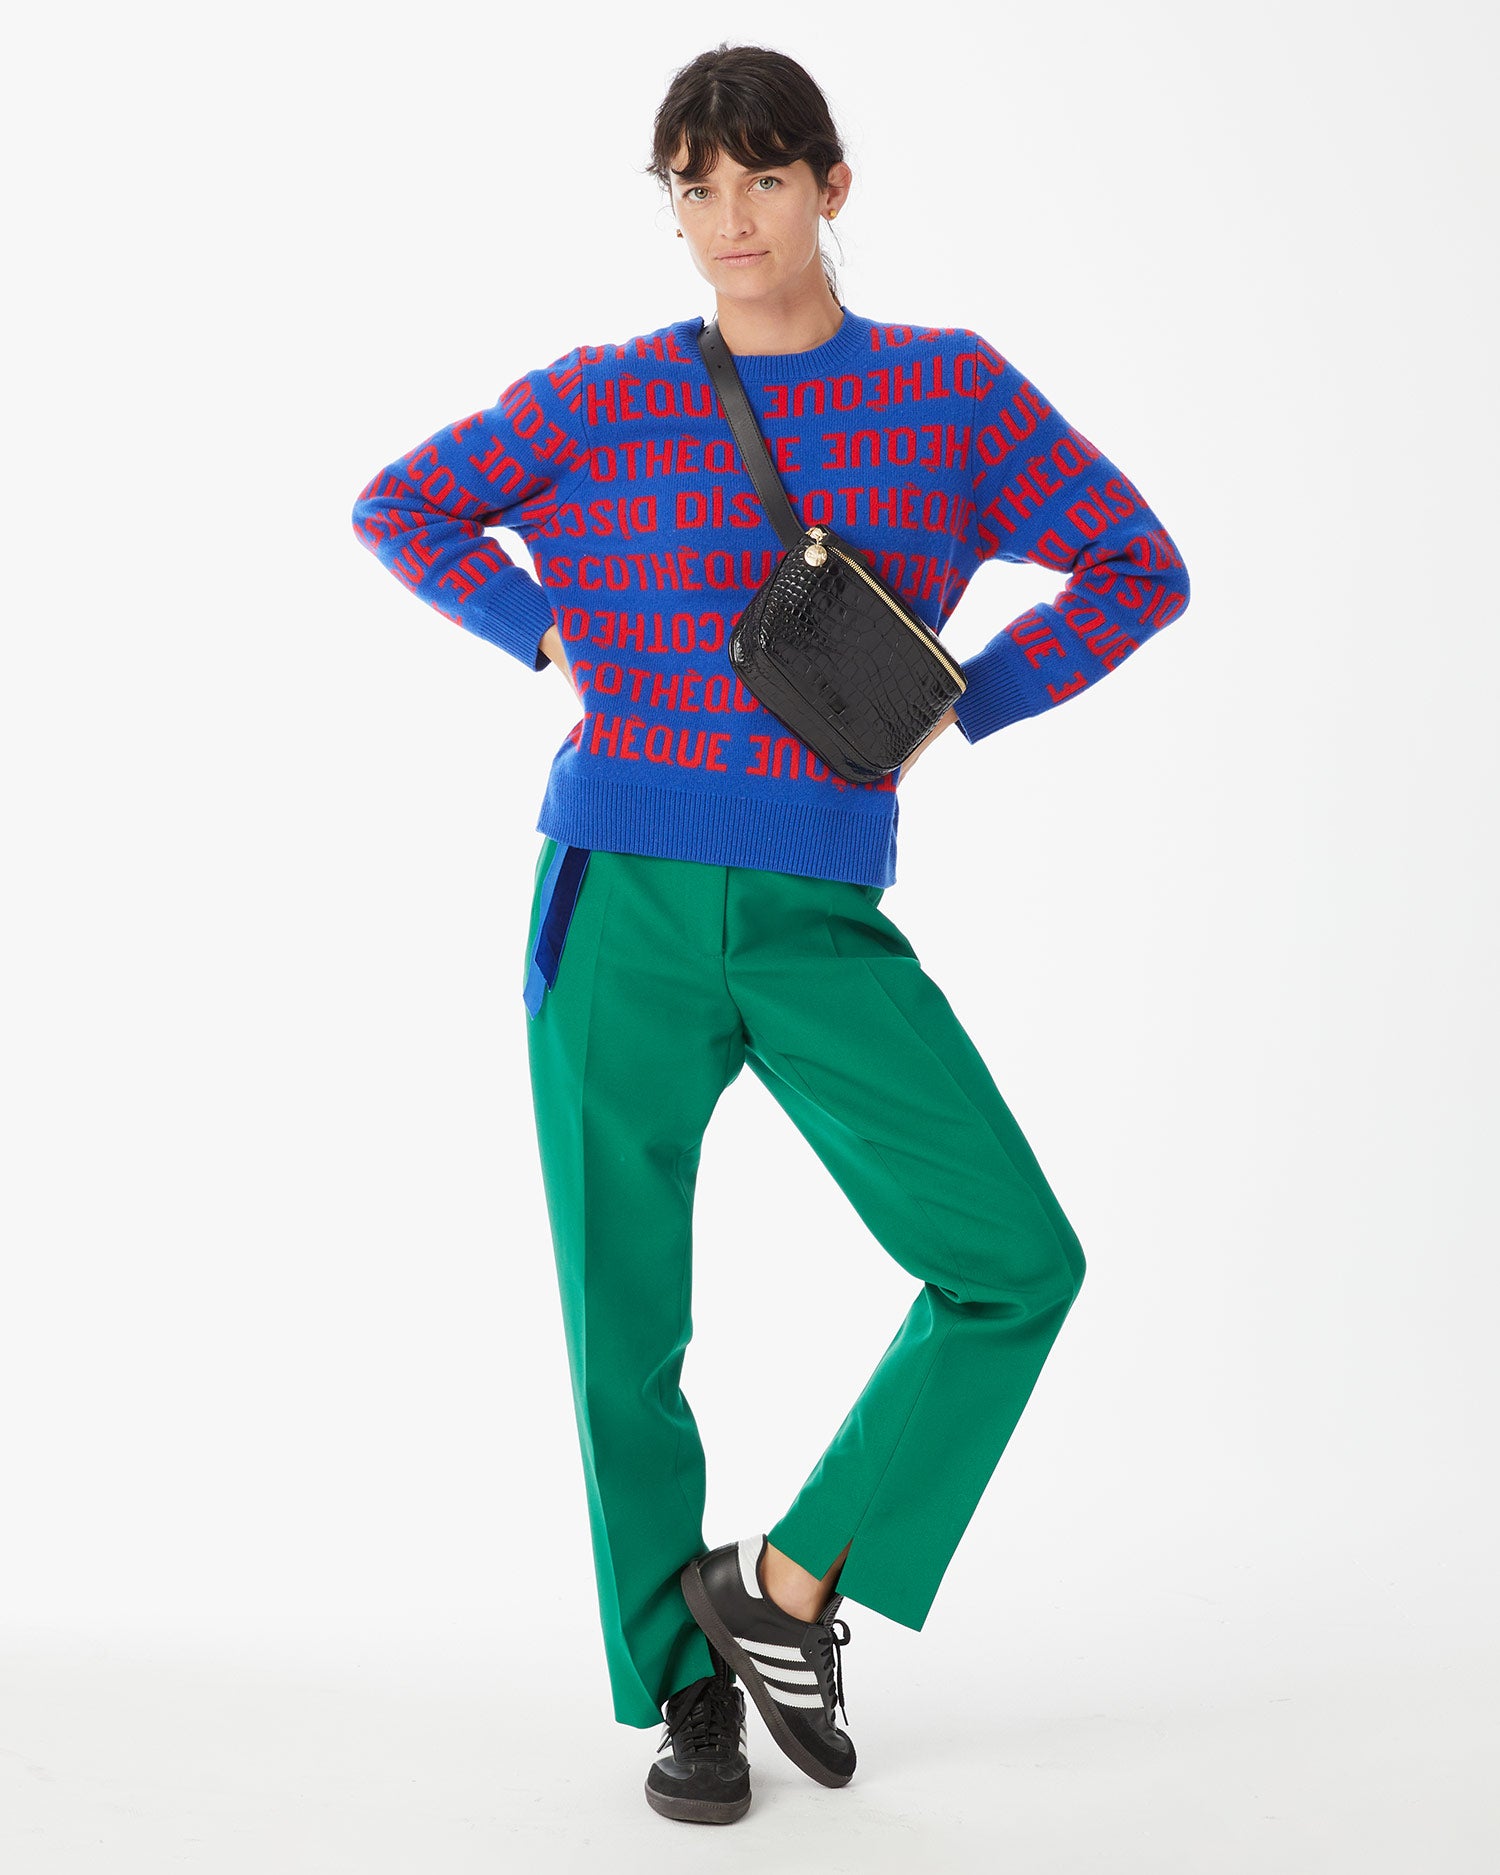 Danika wearing the Cobalt with Poppy Discotheque Classic Sweater with green pants and the Black Croco Fanny Pack across her chest. 